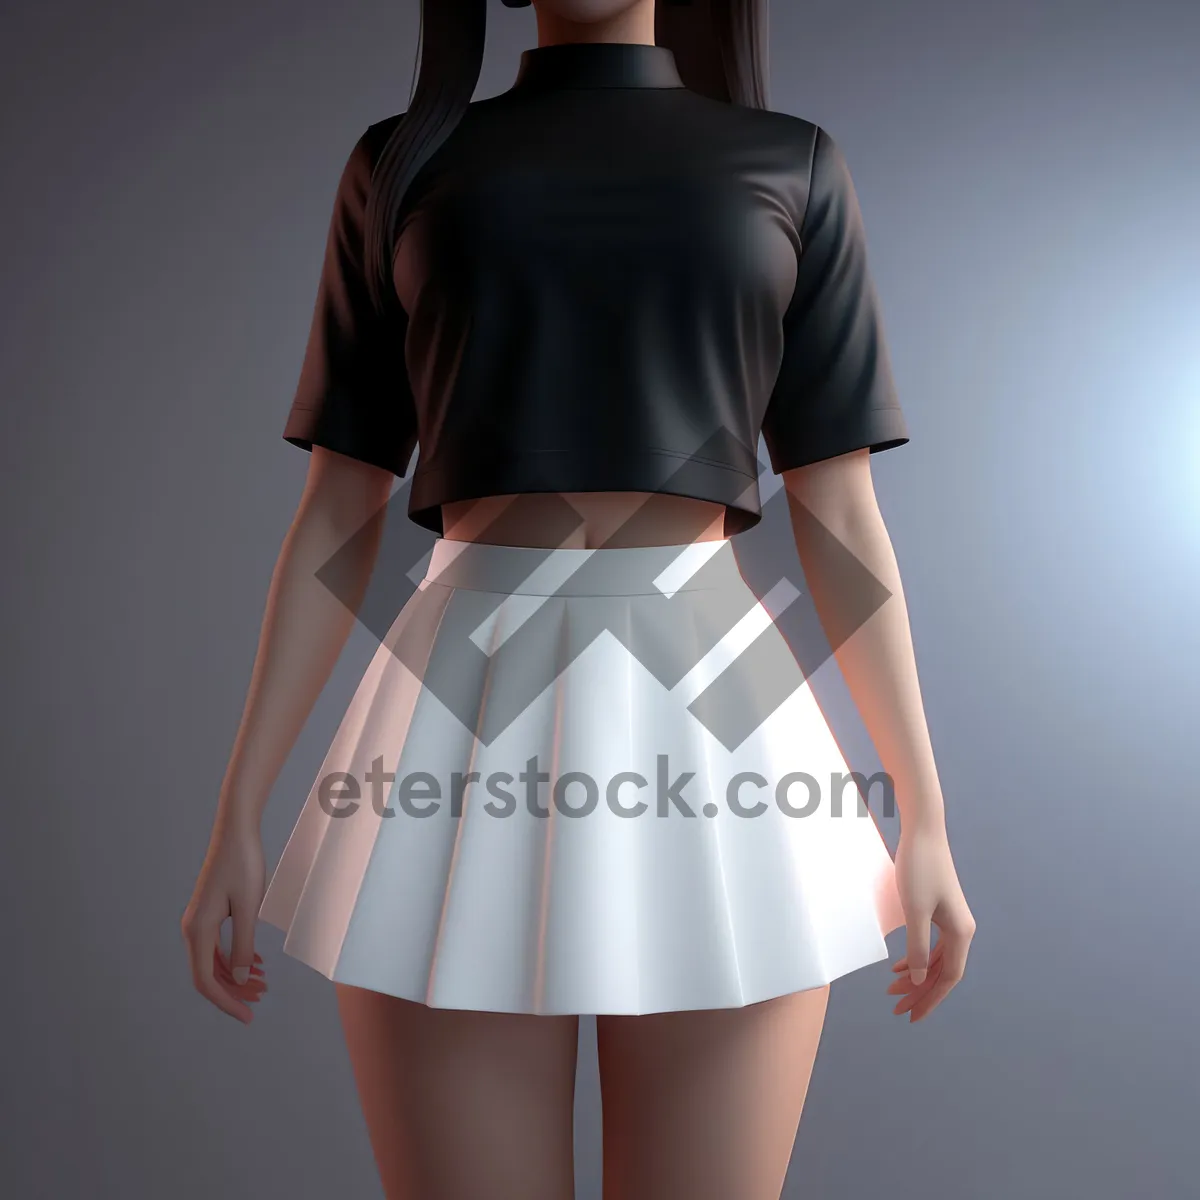 Picture of Smiling brunette model posing in cute fashion skirt